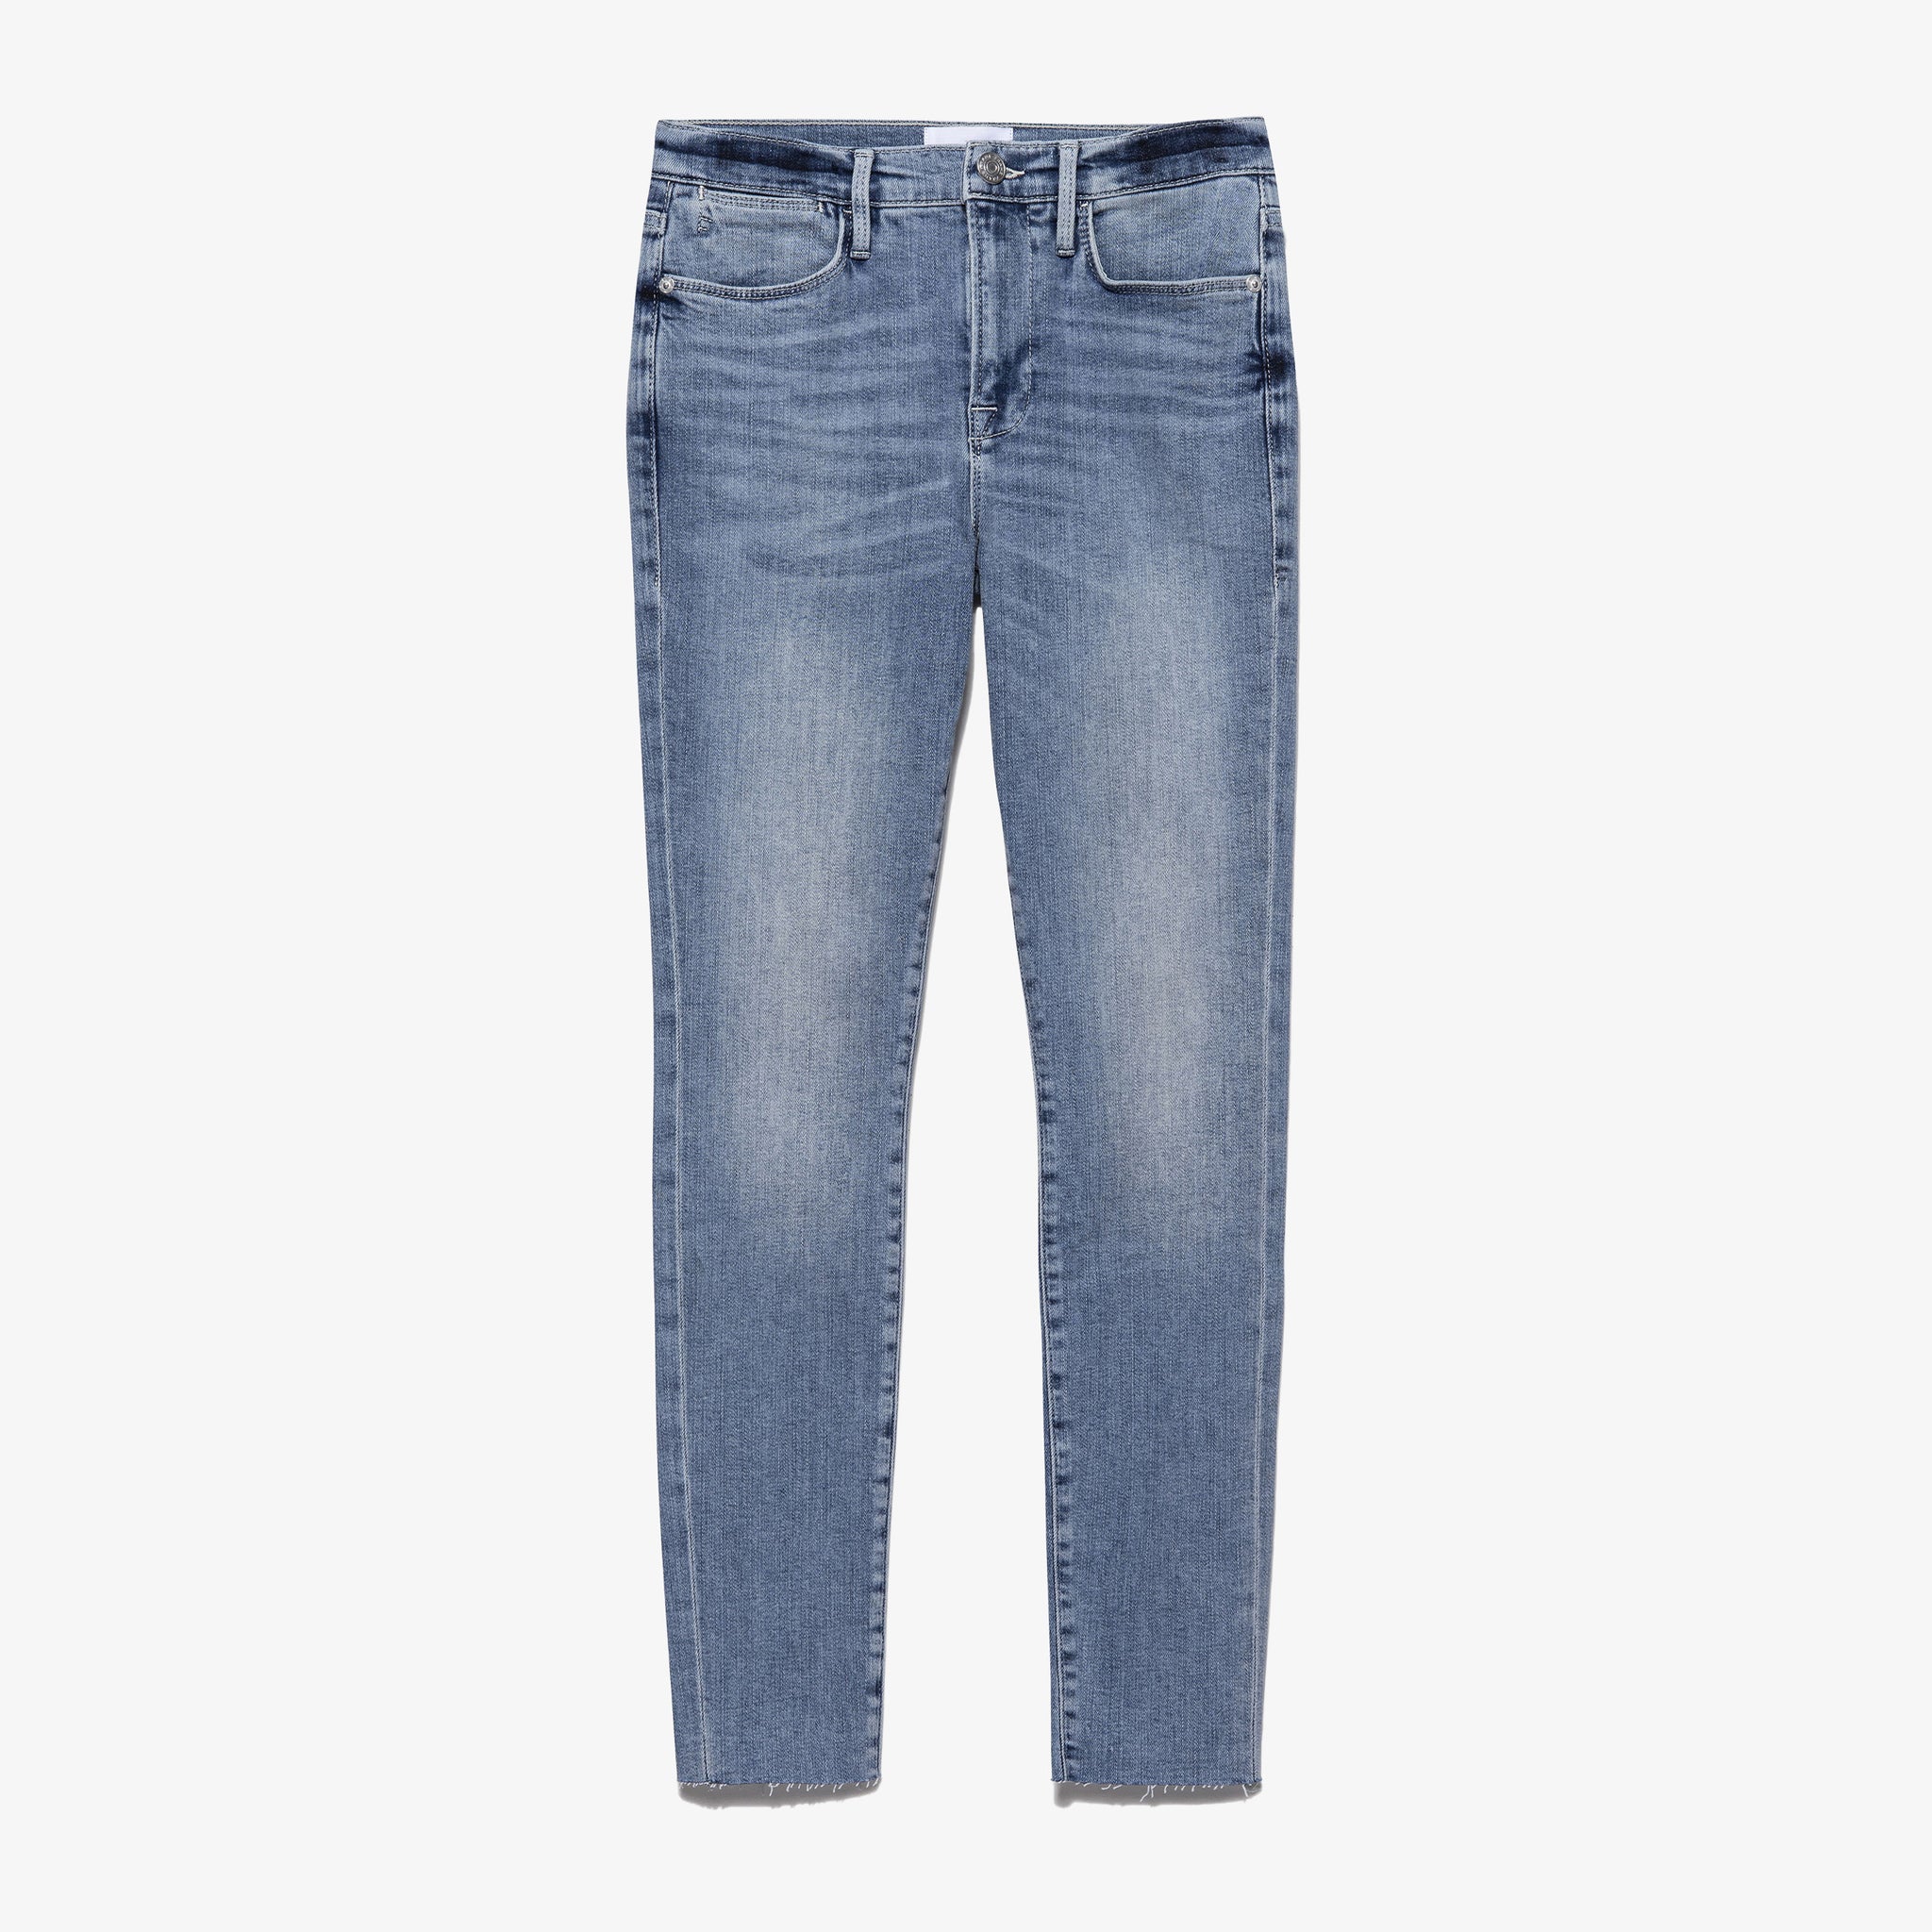 packshot image of the FRAME Denim Le High Skinny Raw After Jean in Galeston